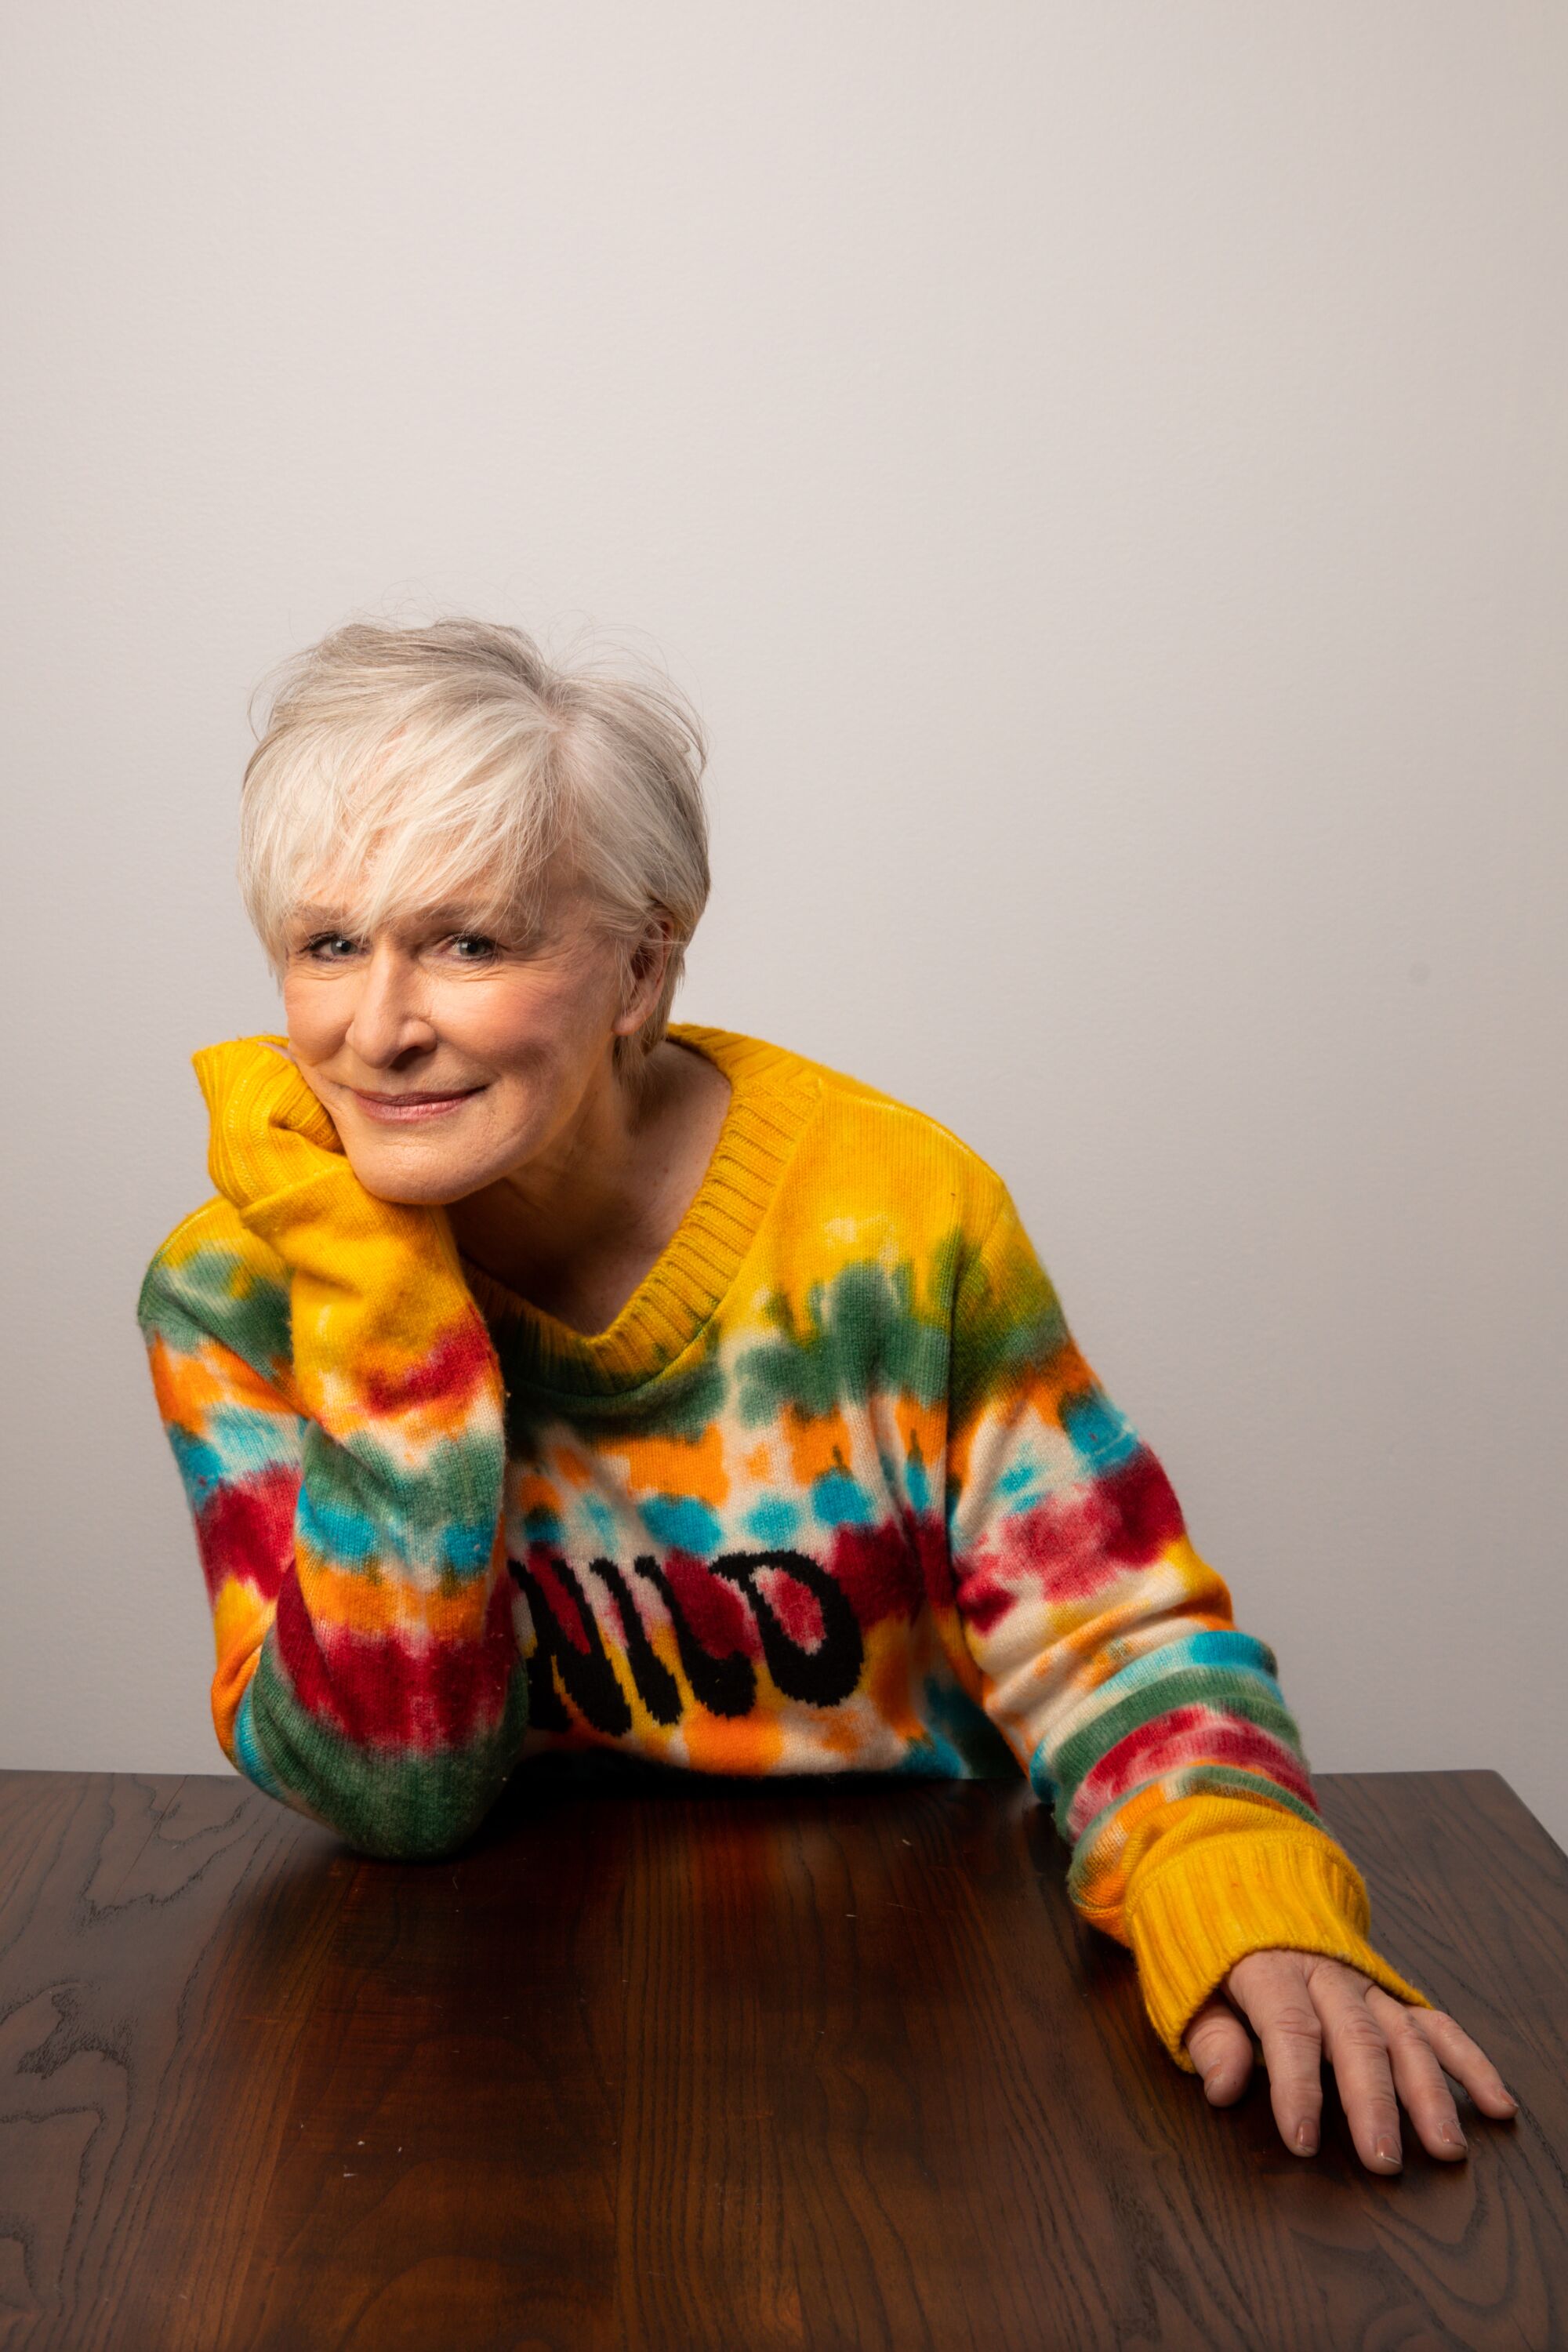 Actor Glenn Close of “Four Good Days,” photographed in the L.A. Times Studio at the Sundance Film Festival.